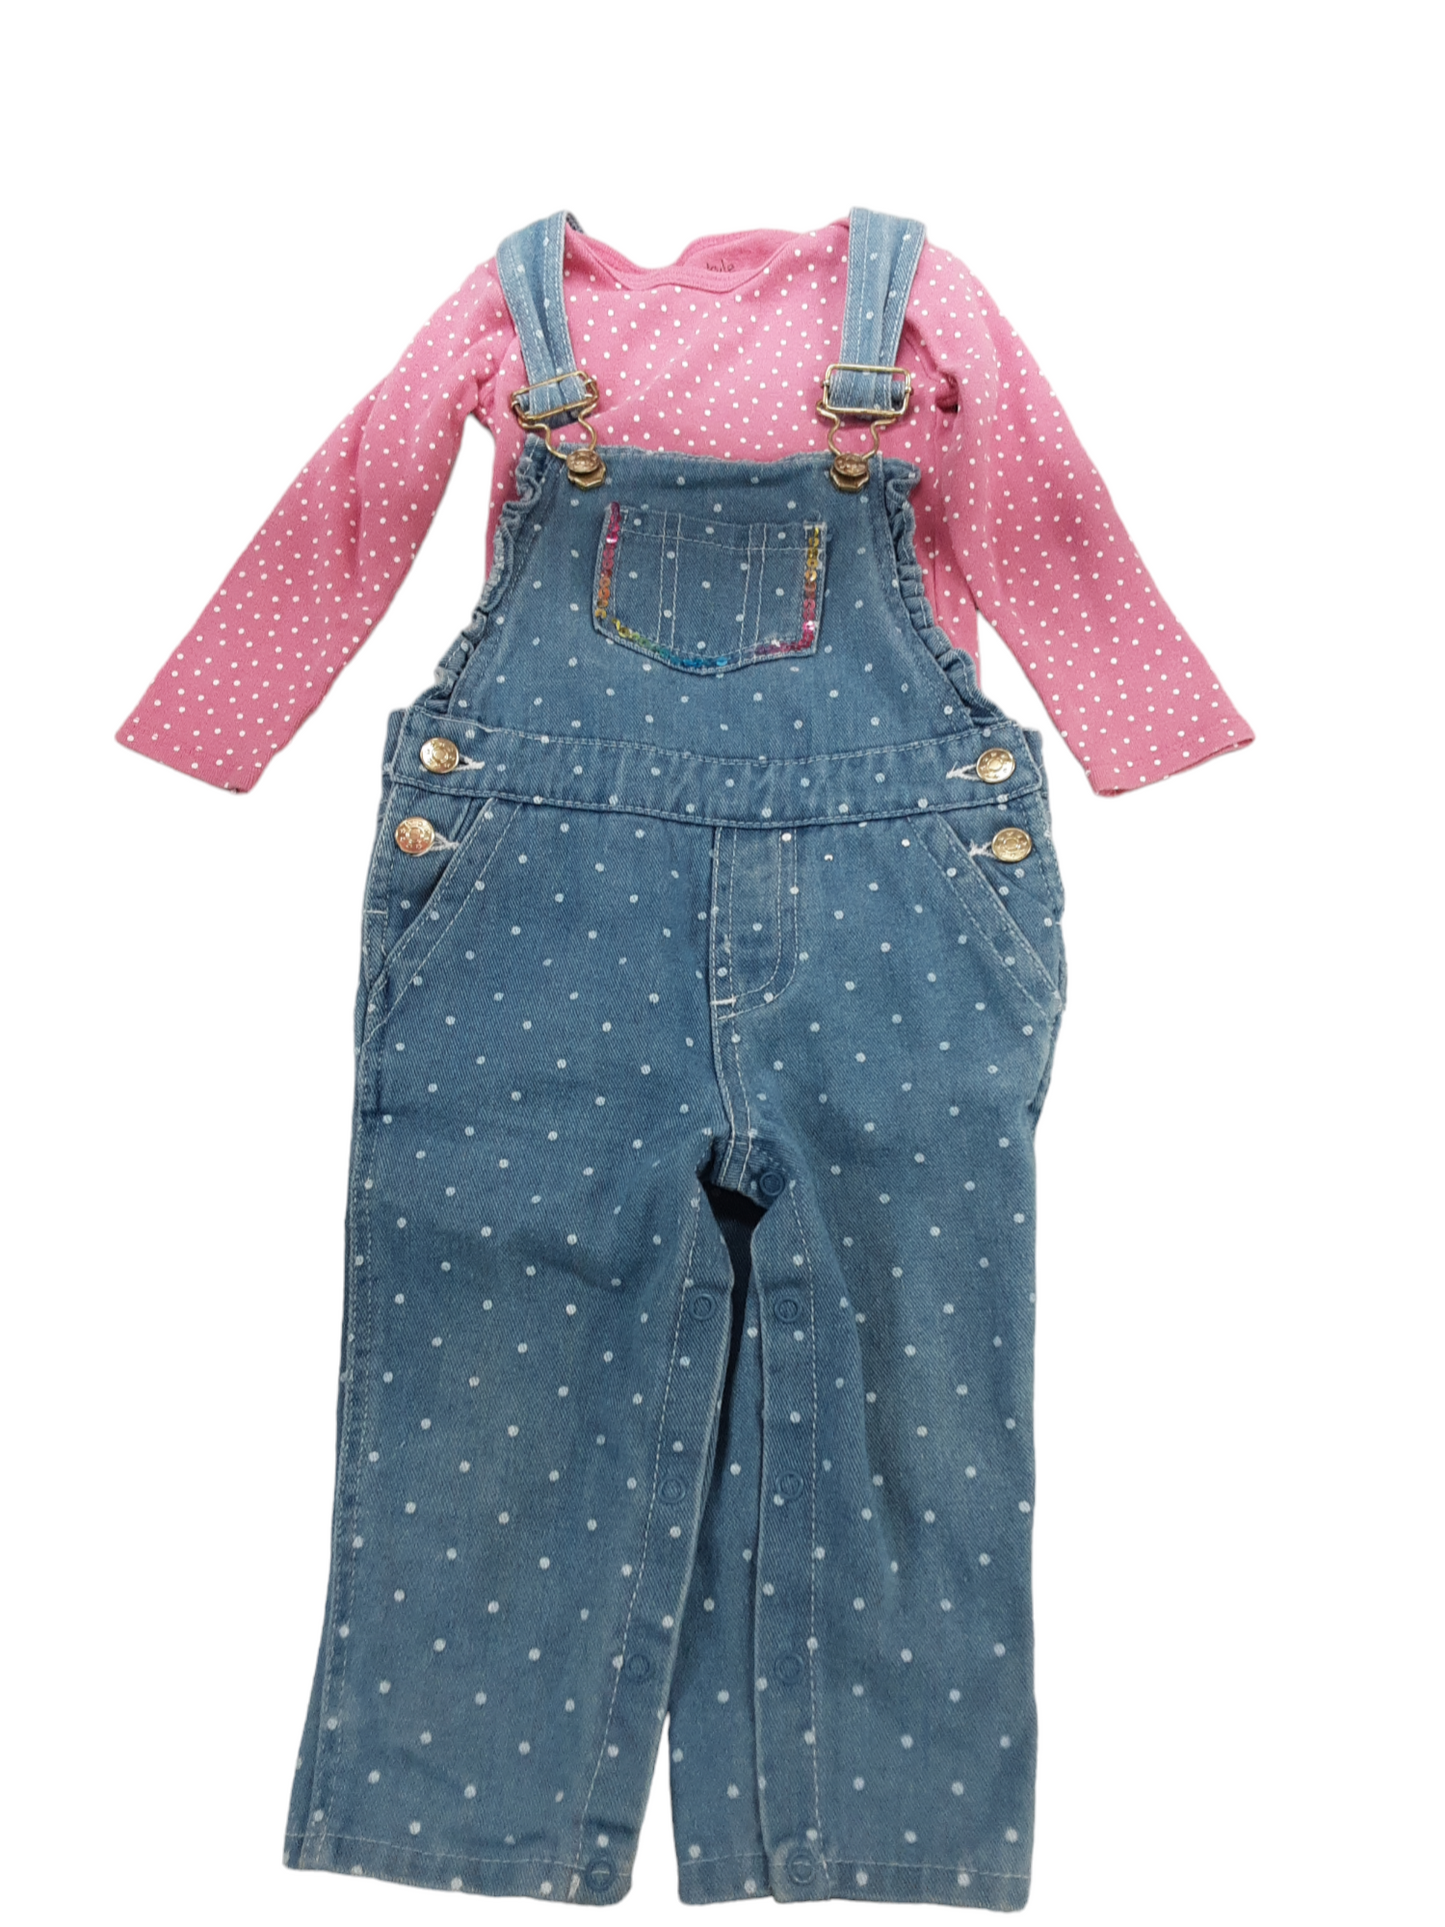 Polka-dot denim  overalls paired with pink polka-dot onsie size 18-24months